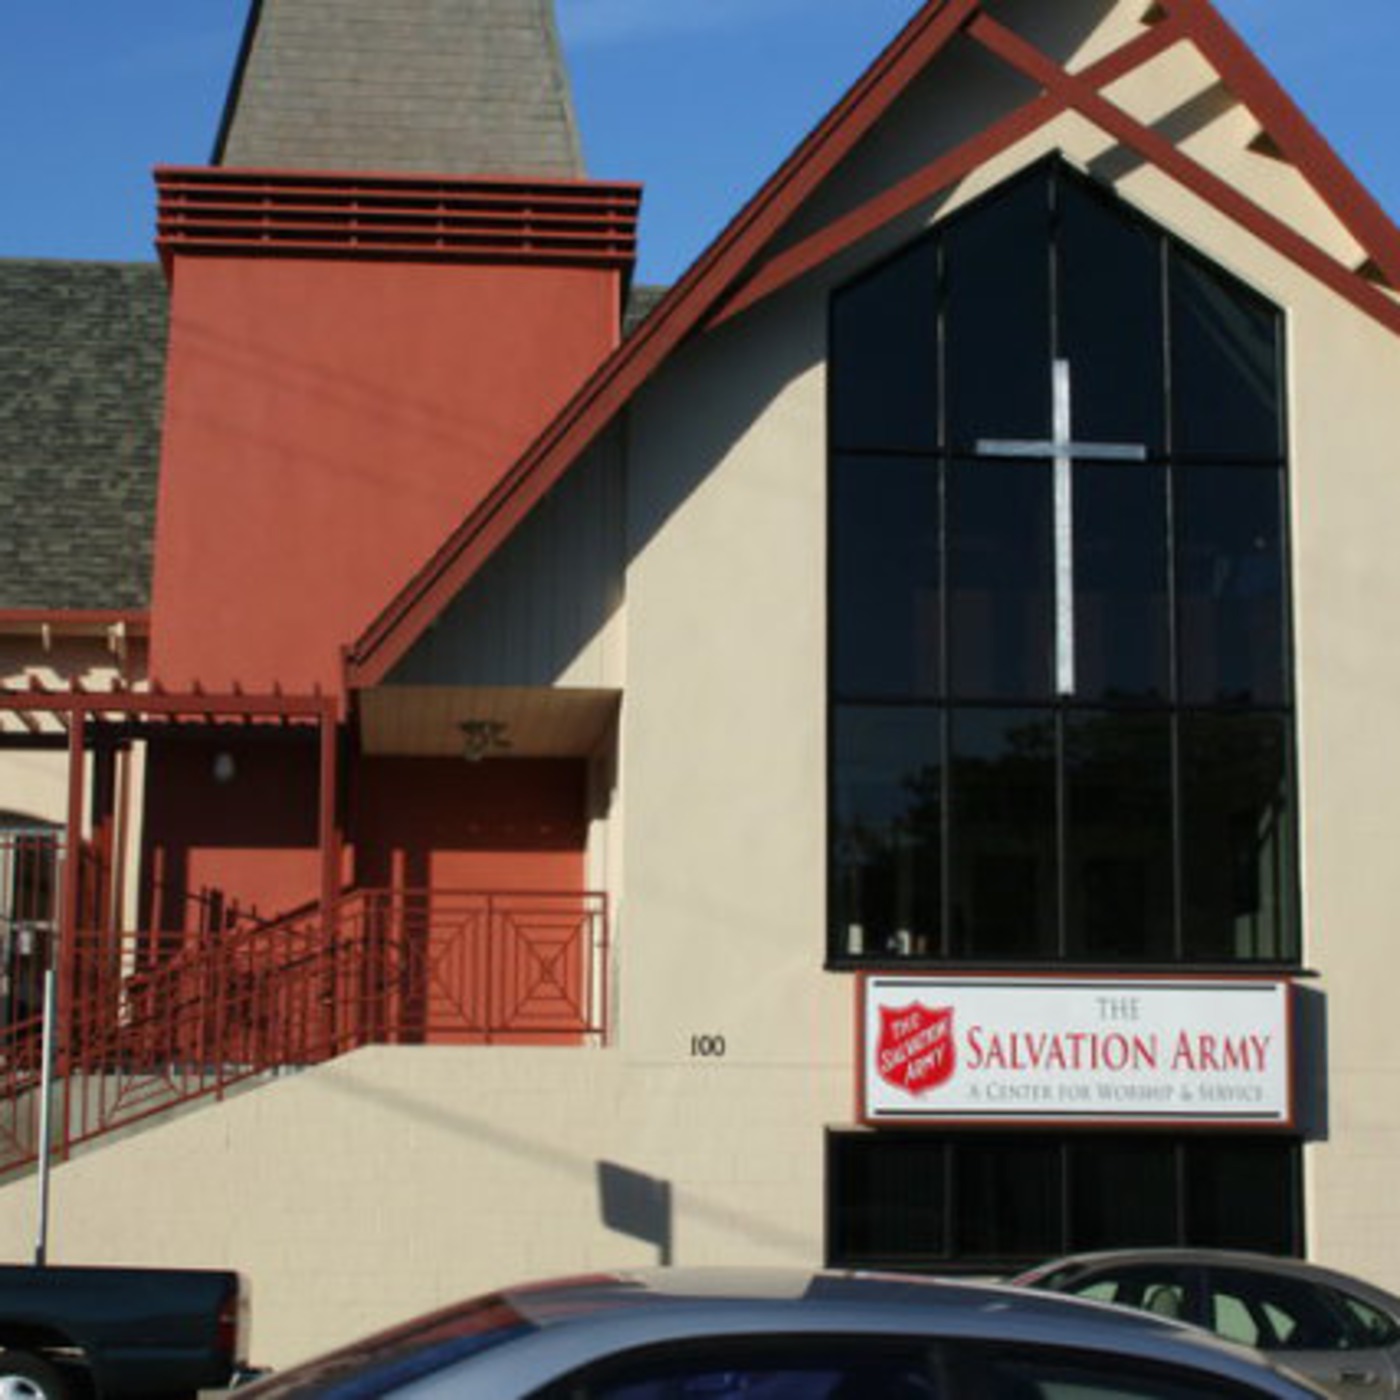 The Salvation Army Roseville, CA's Podcast